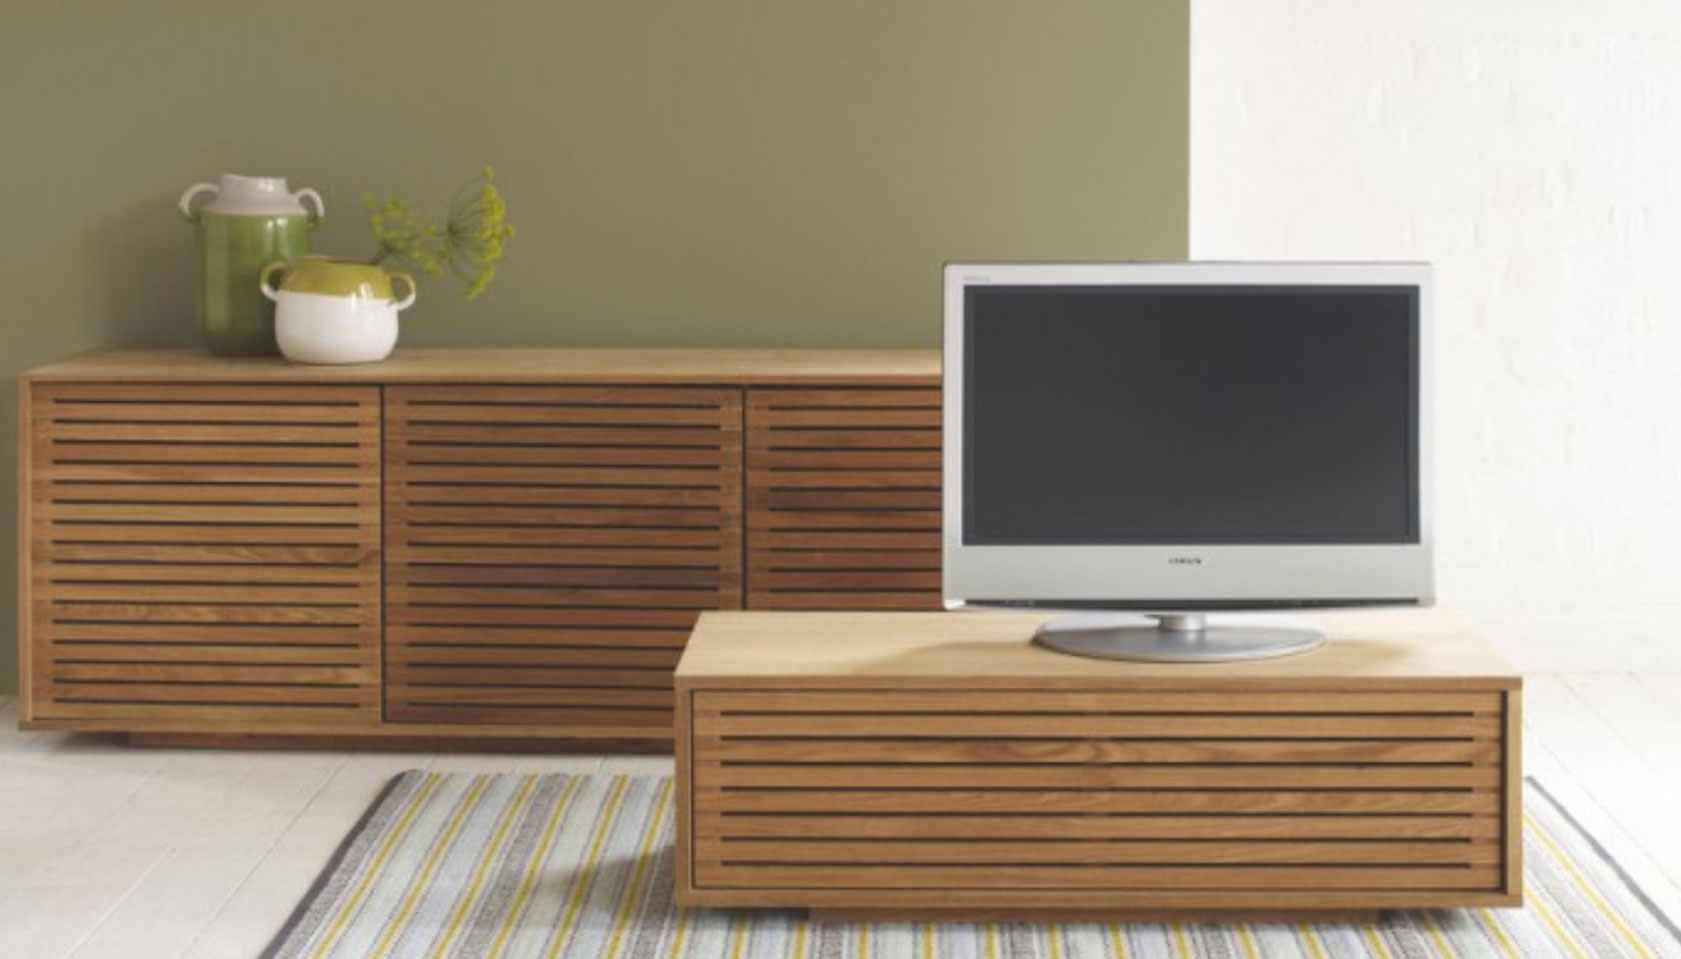 6 Reasons To Go With Wooden Corner TV Stands For Flat Screens